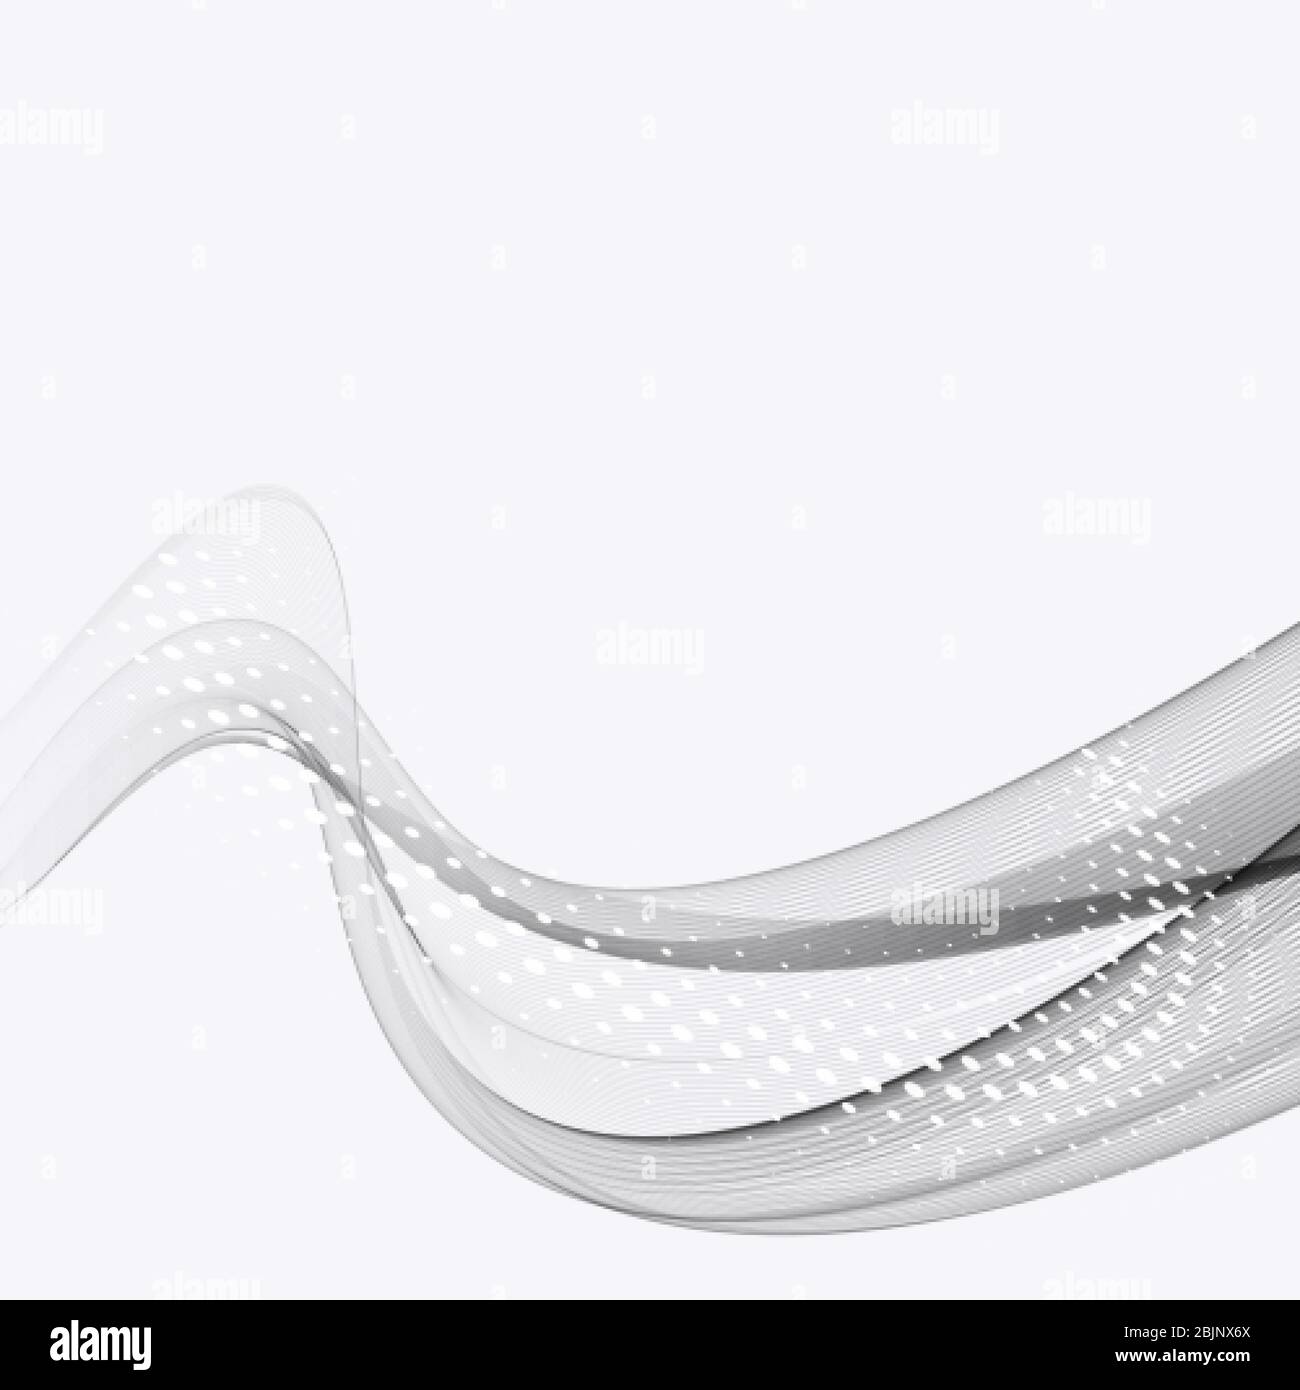 Decorative Swoosh Vector Images (over 9,500)